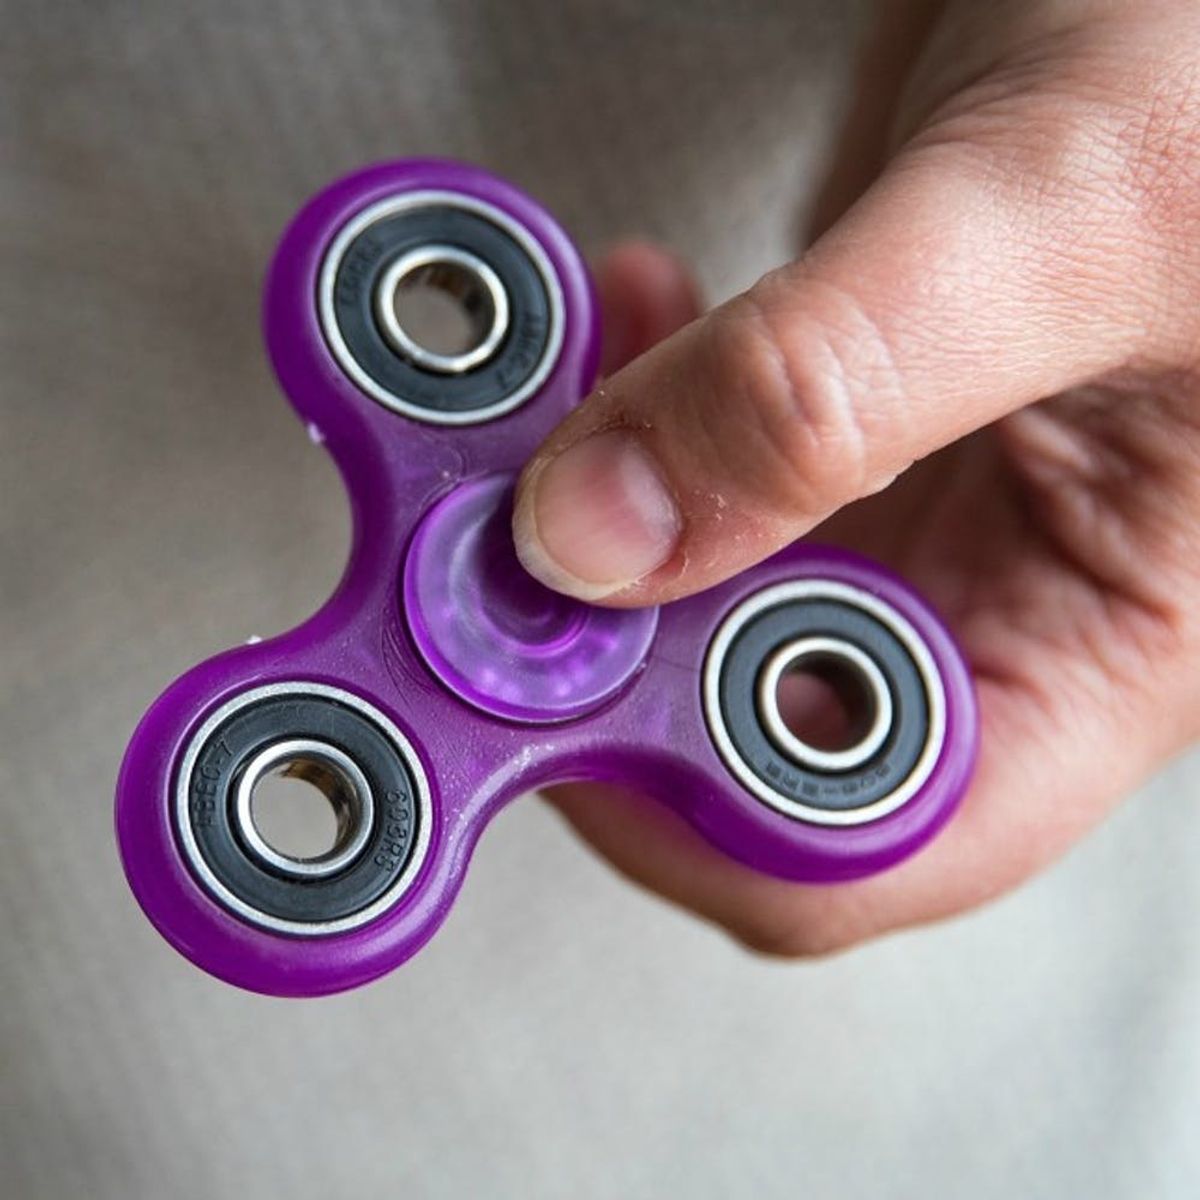 For People With Invisible Disabilities, Fidget Spinners Are More Than Just a Fad